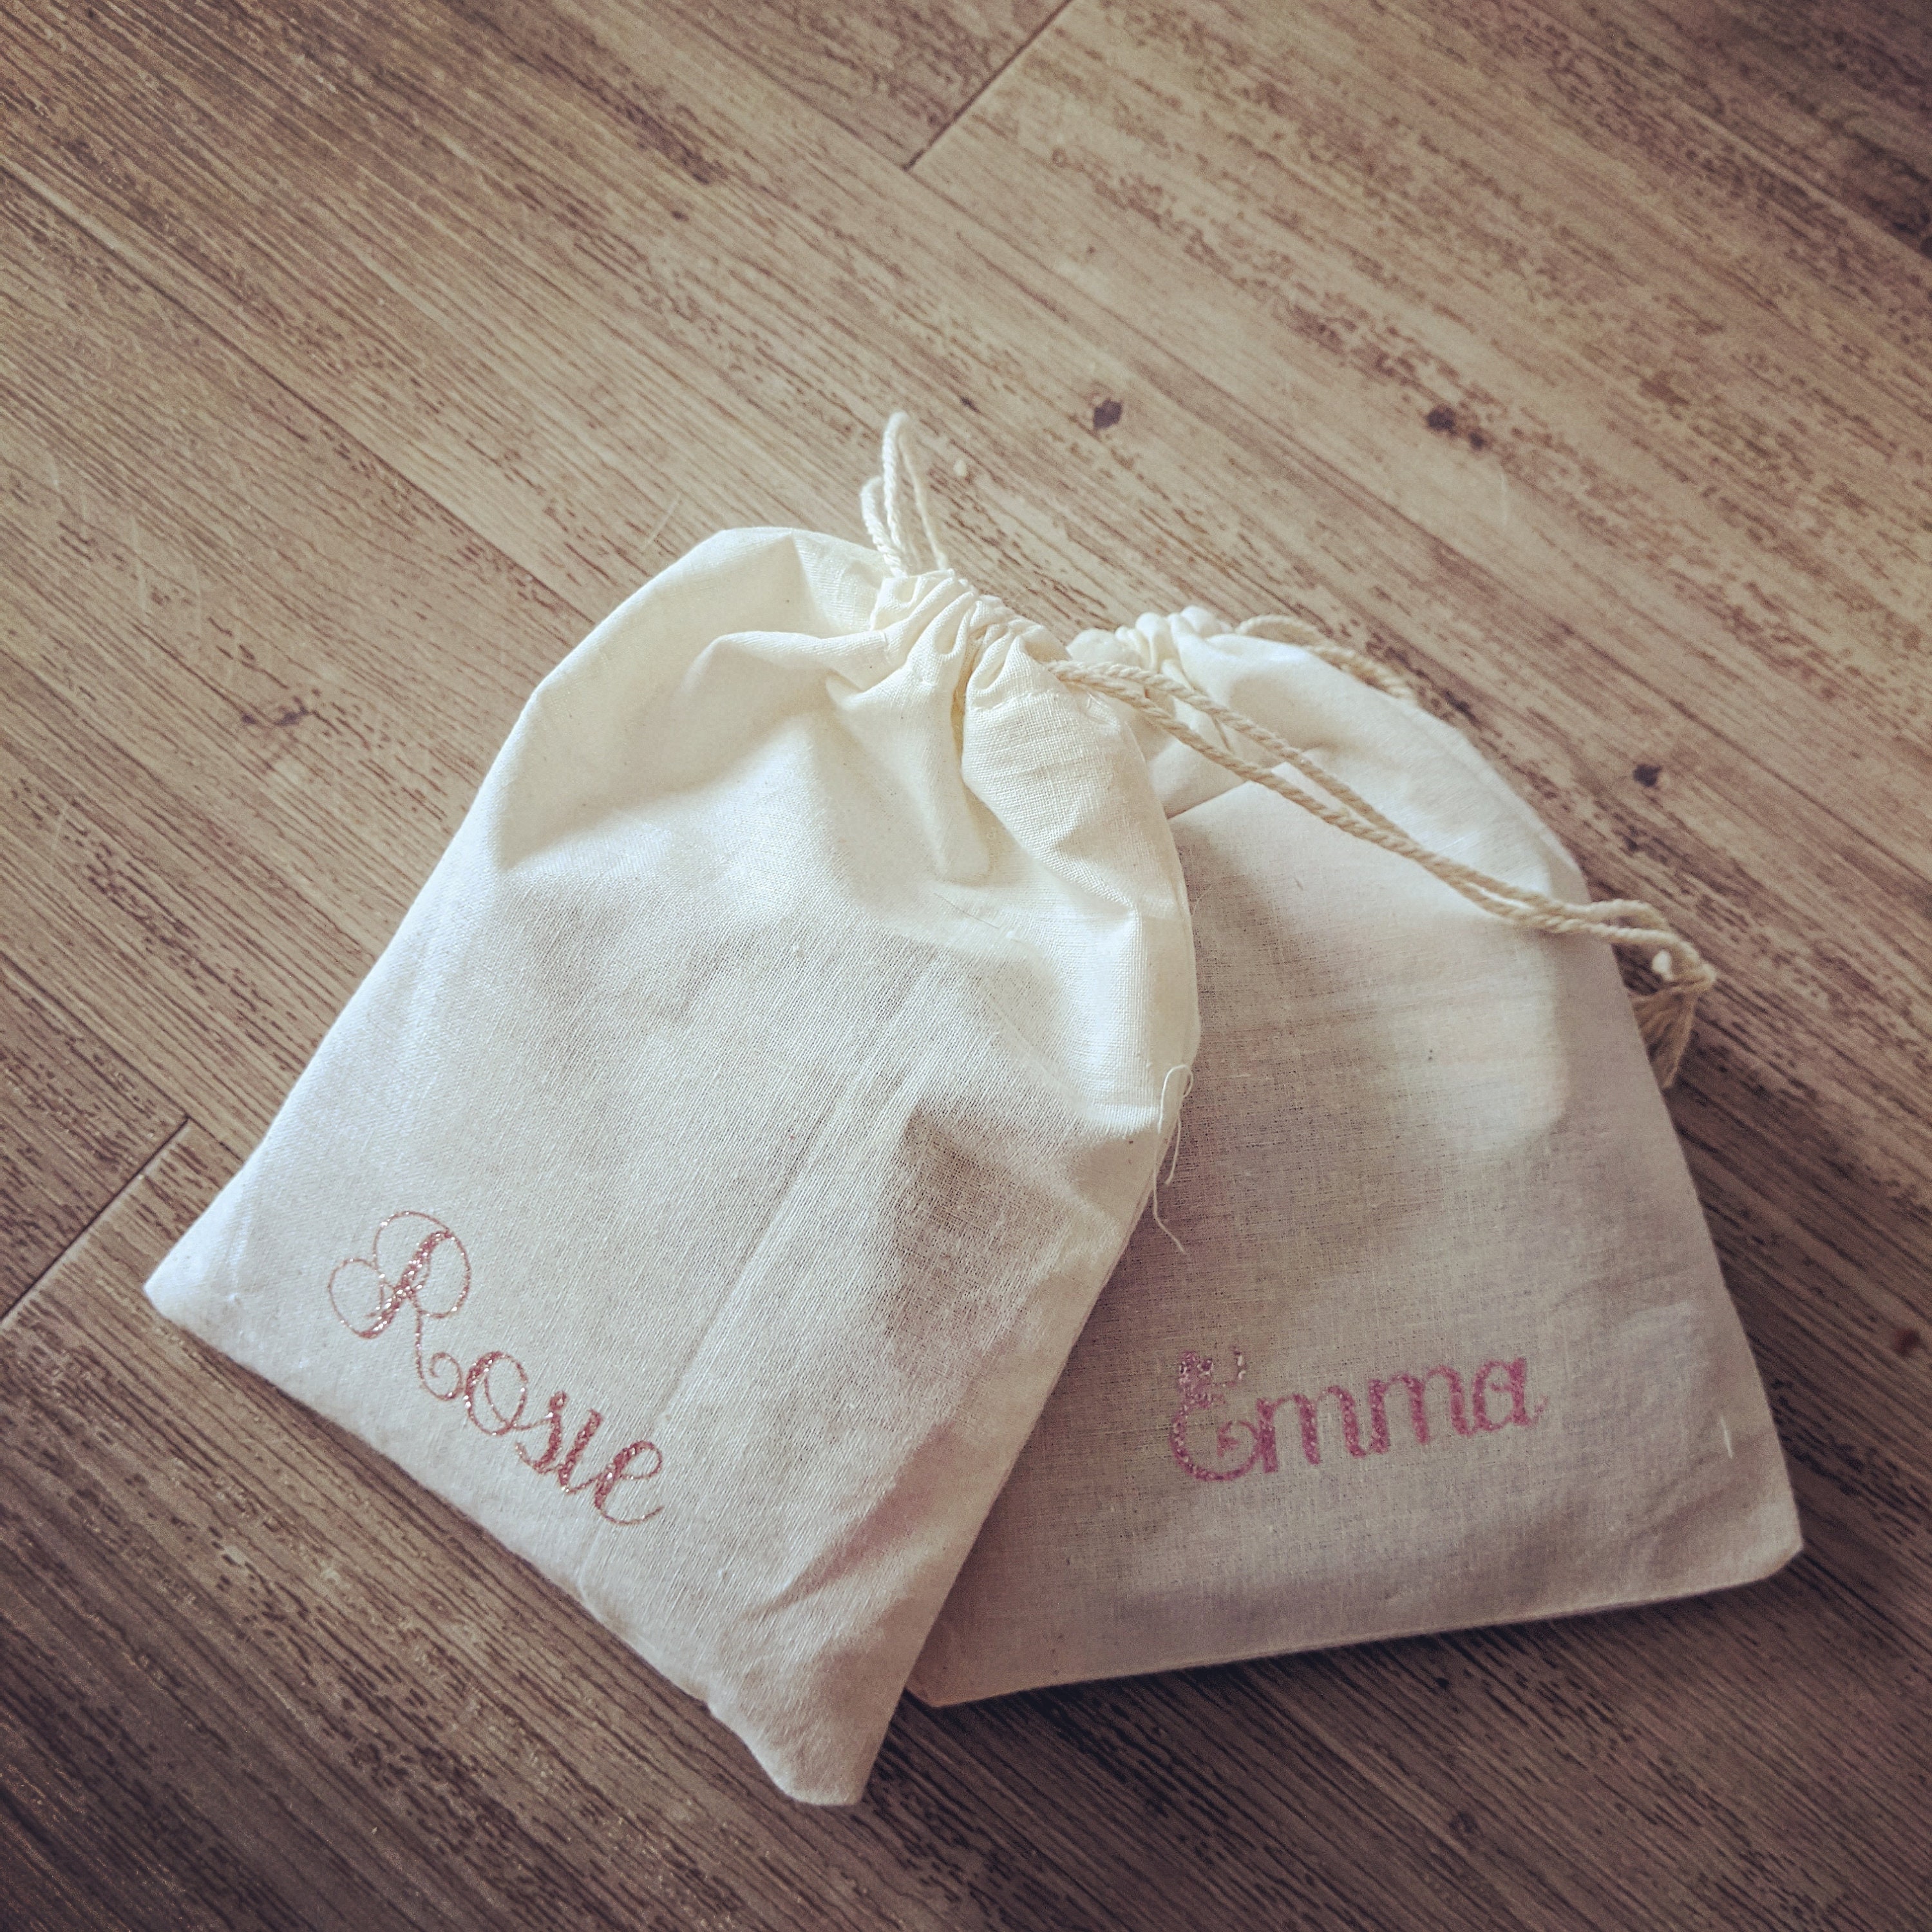 Personalised Spa Bag and Contents Perfect for Children's Spa Birthday ...